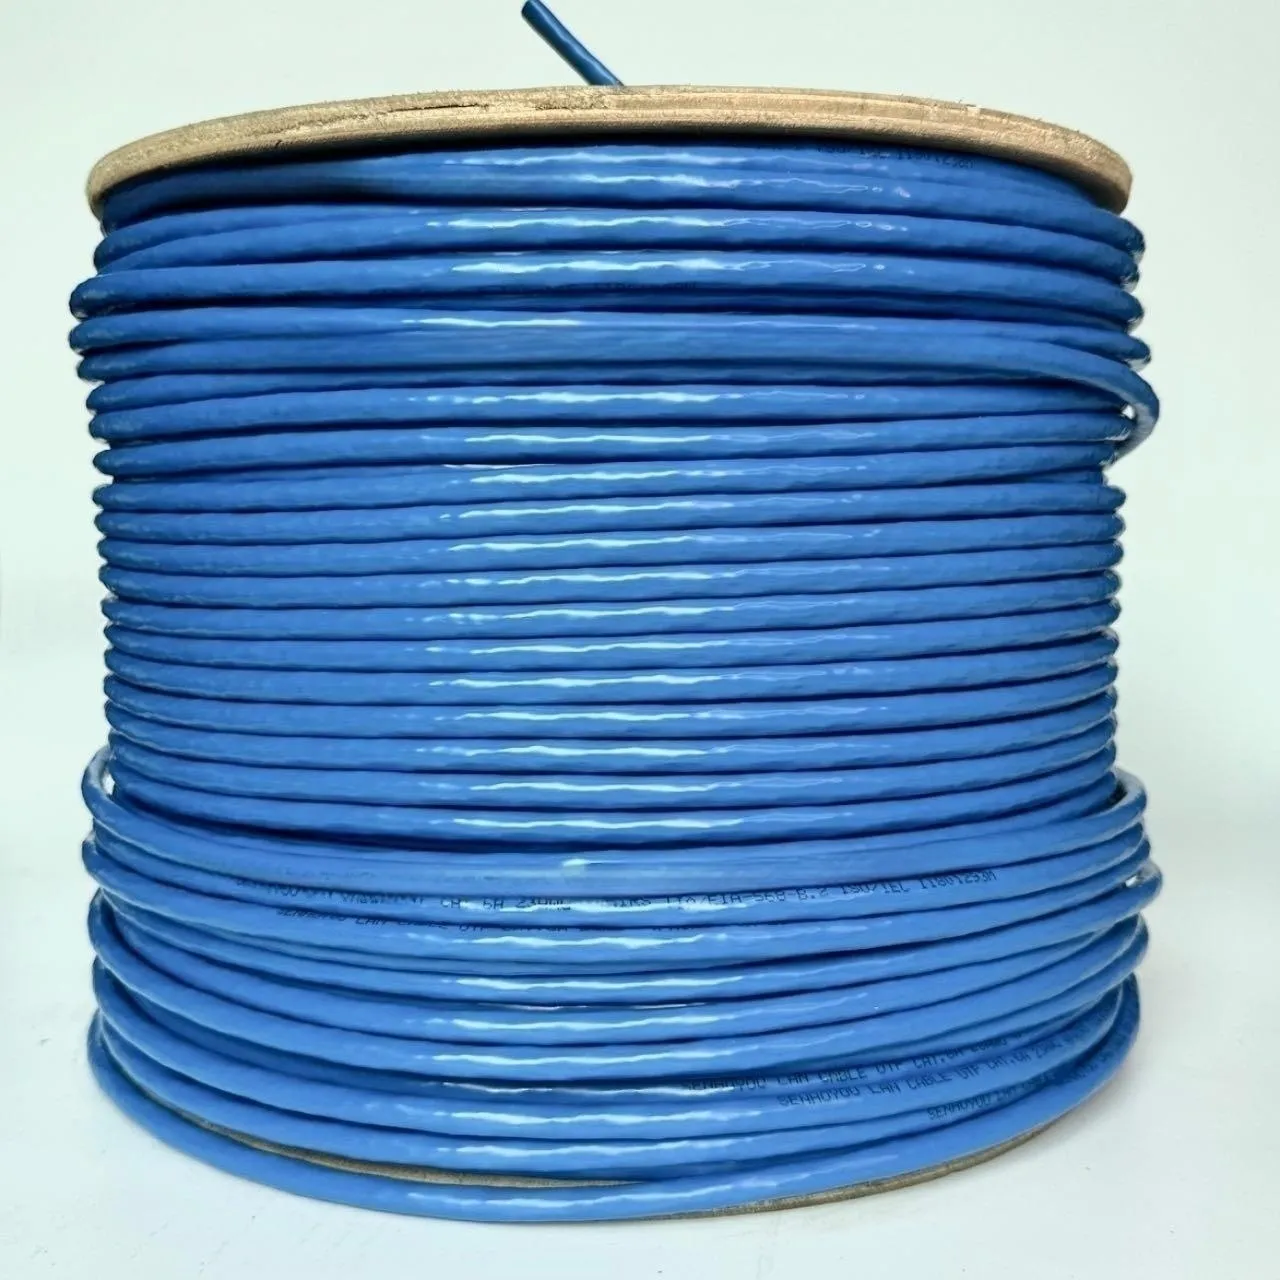 Customized 1000ft 305m network Cat6 wholesale price cat6a cat6 cable 305m roll price cable utp ftp cat 6 shielded network cable